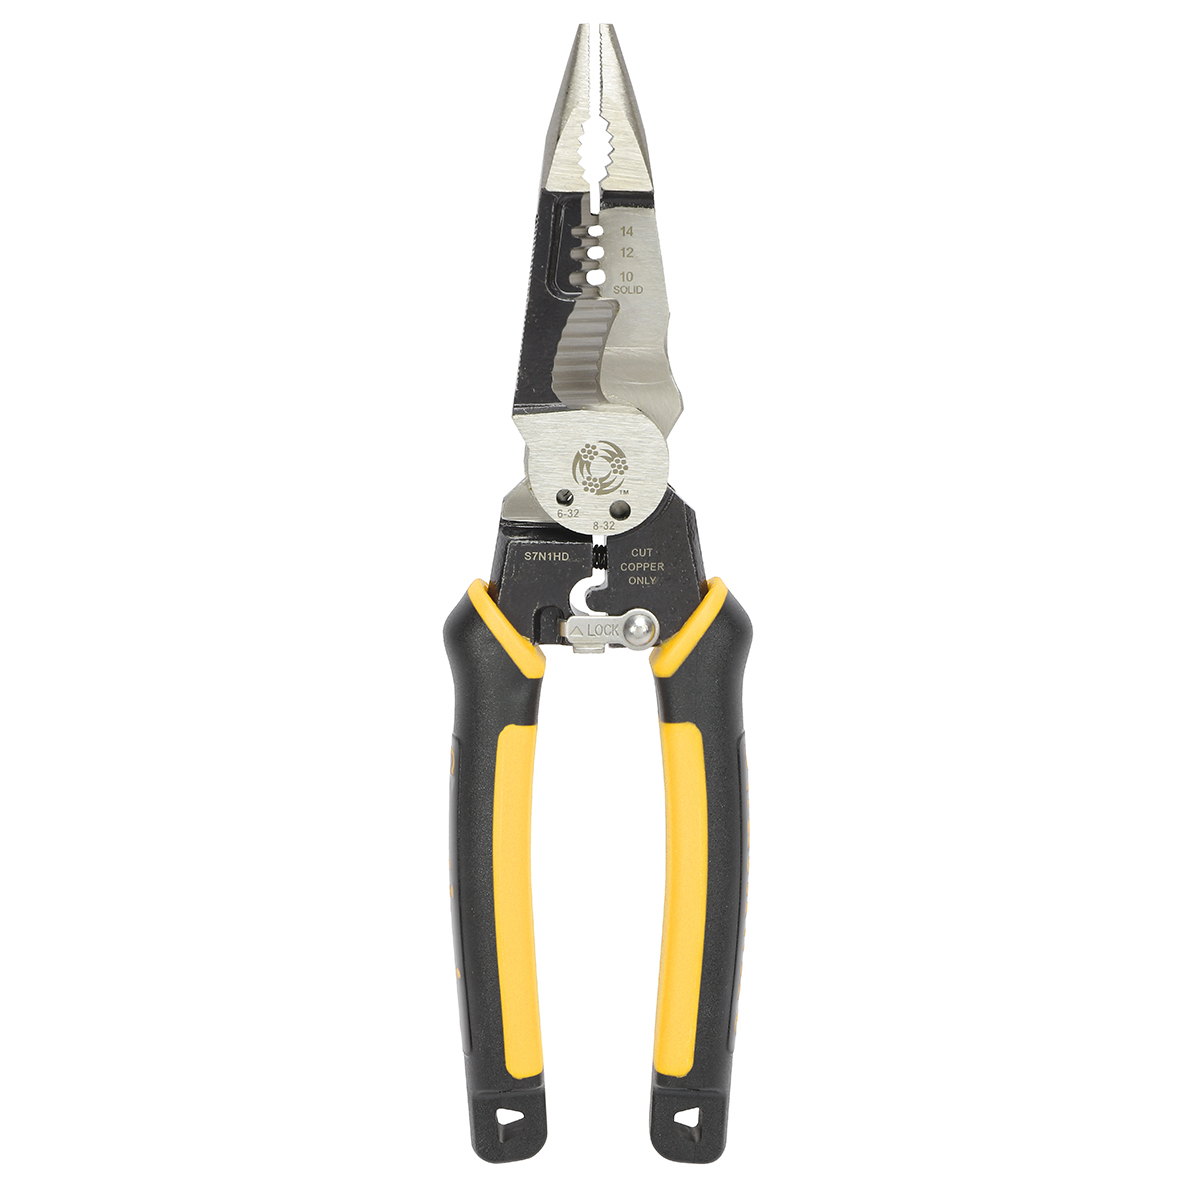 Southwire-S7N1HD 7-in-1 Multi Tool Pliers new 